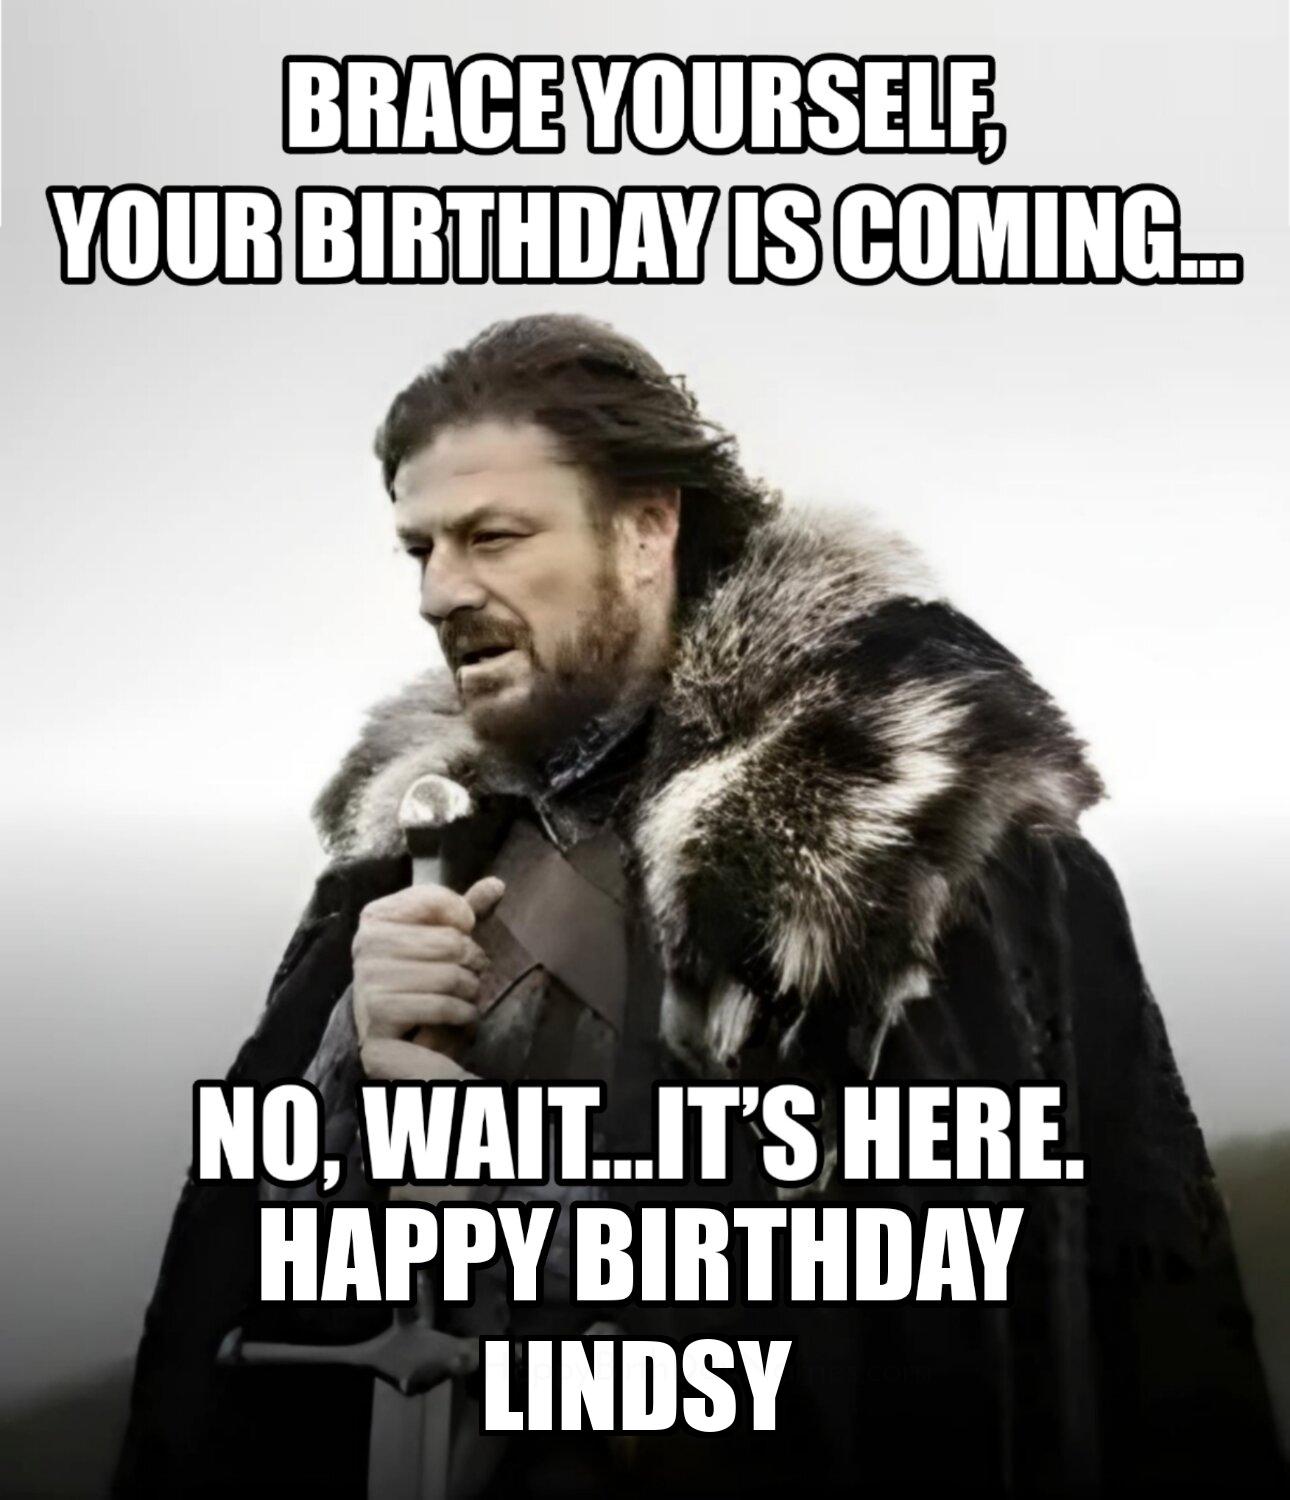 Happy Birthday Lindsy Brace Yourself Your Birthday Is Coming Meme